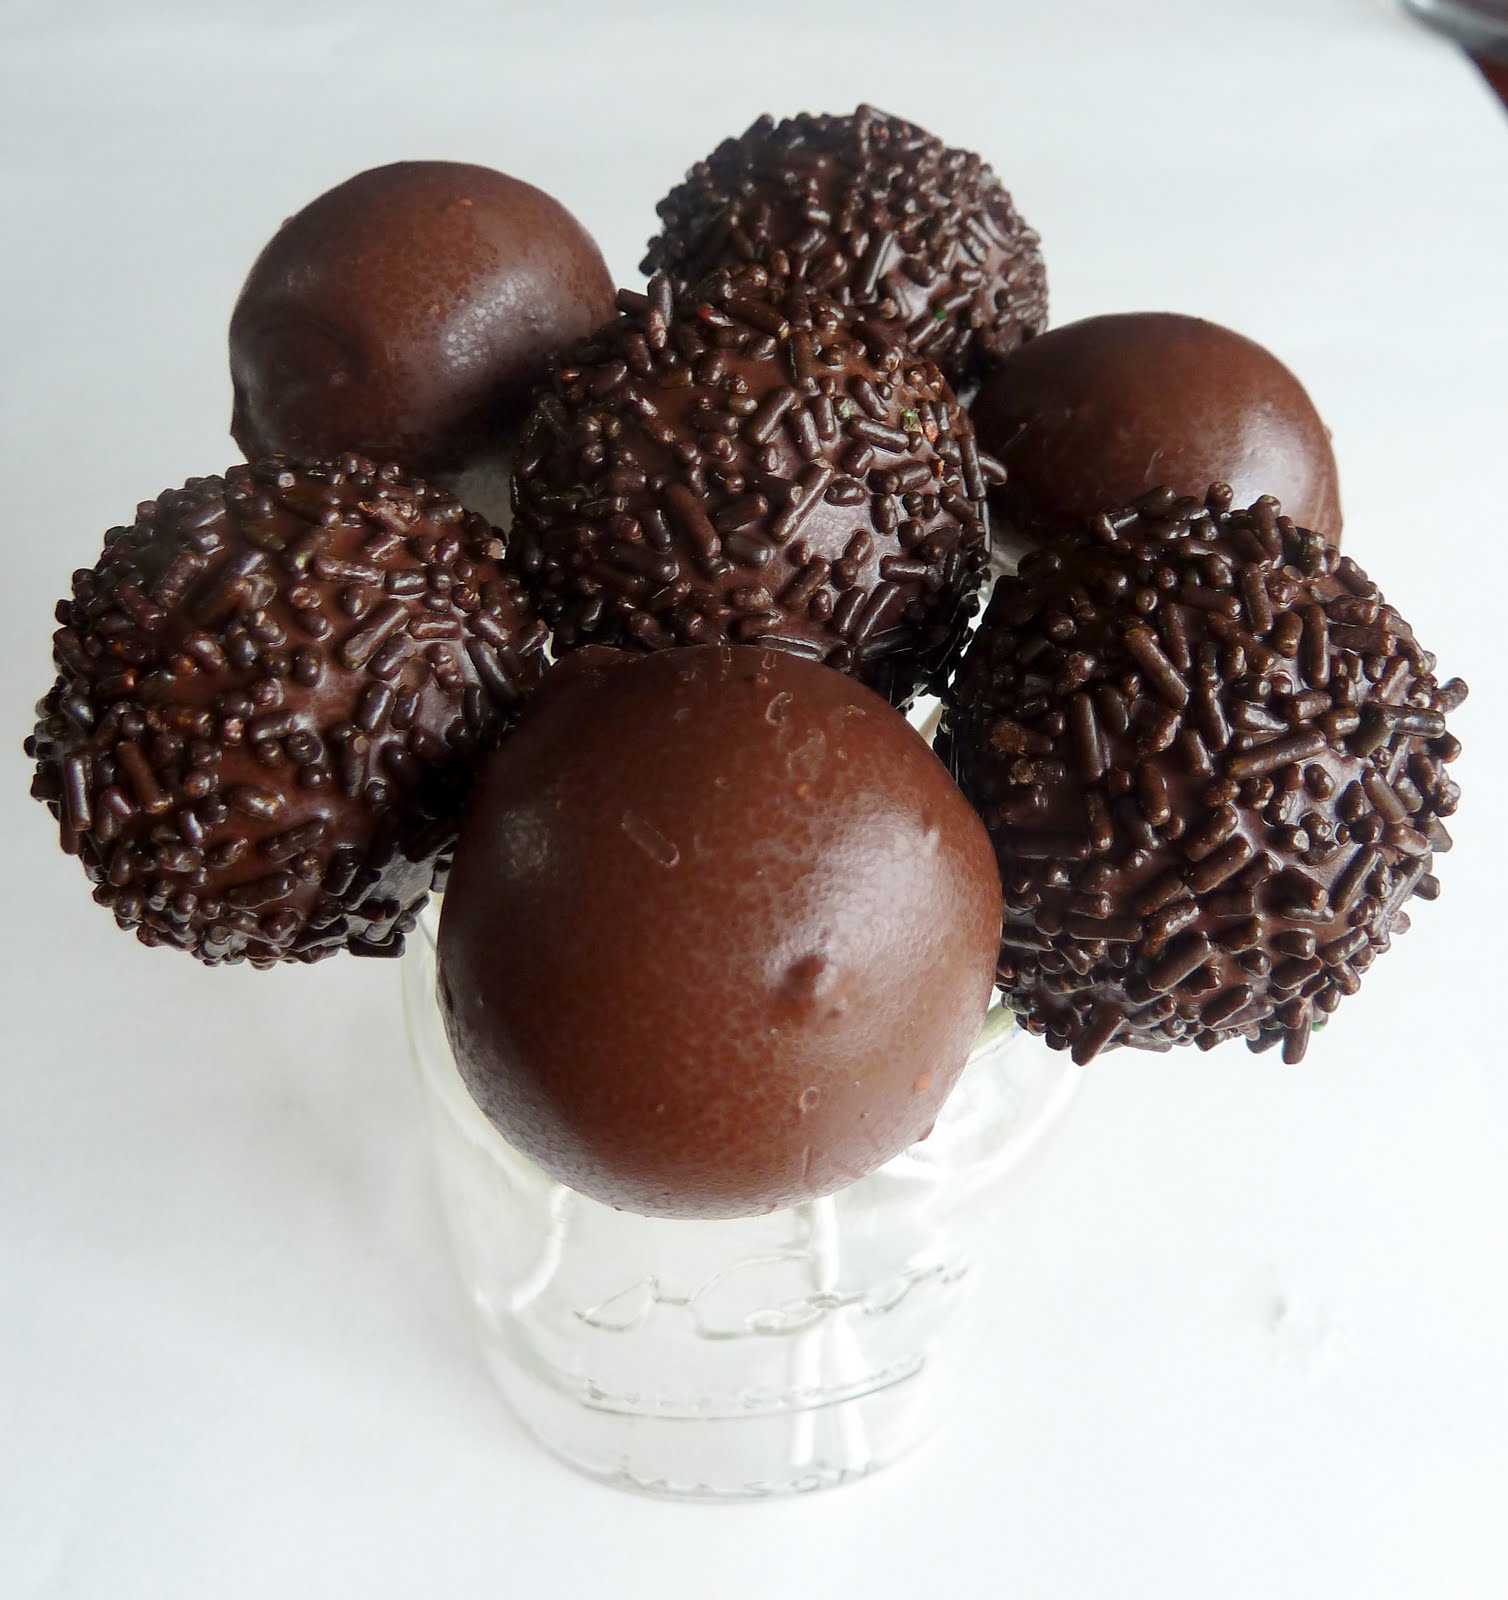 Cake Pops In Cake Pop Maker – Culinary Shades